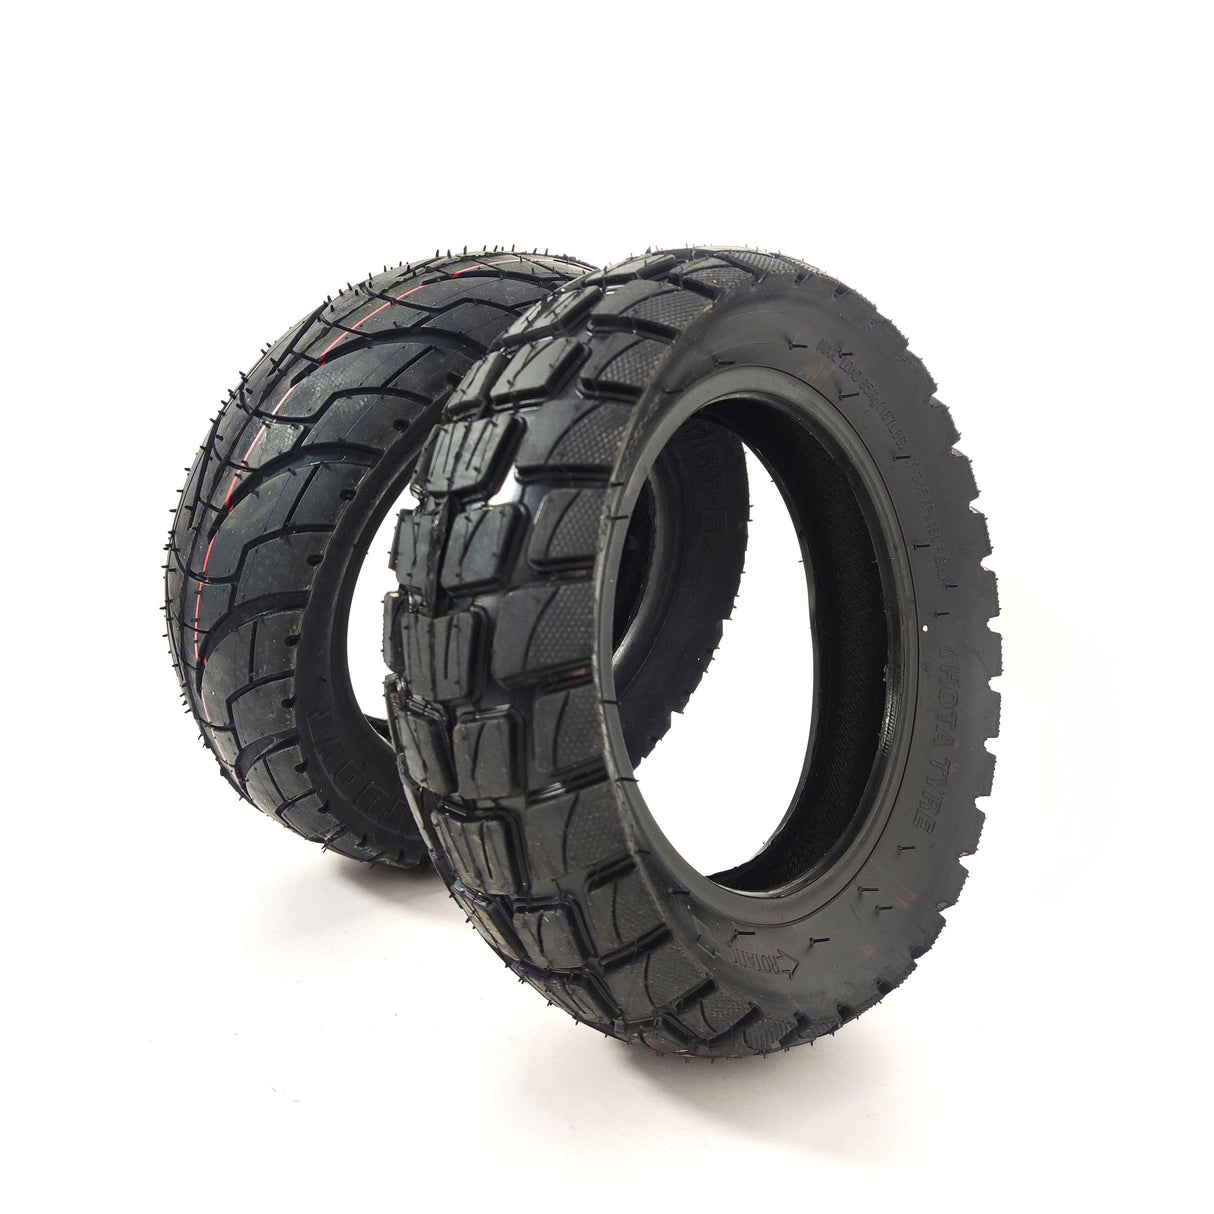 S-scooter road tire - TODIMART